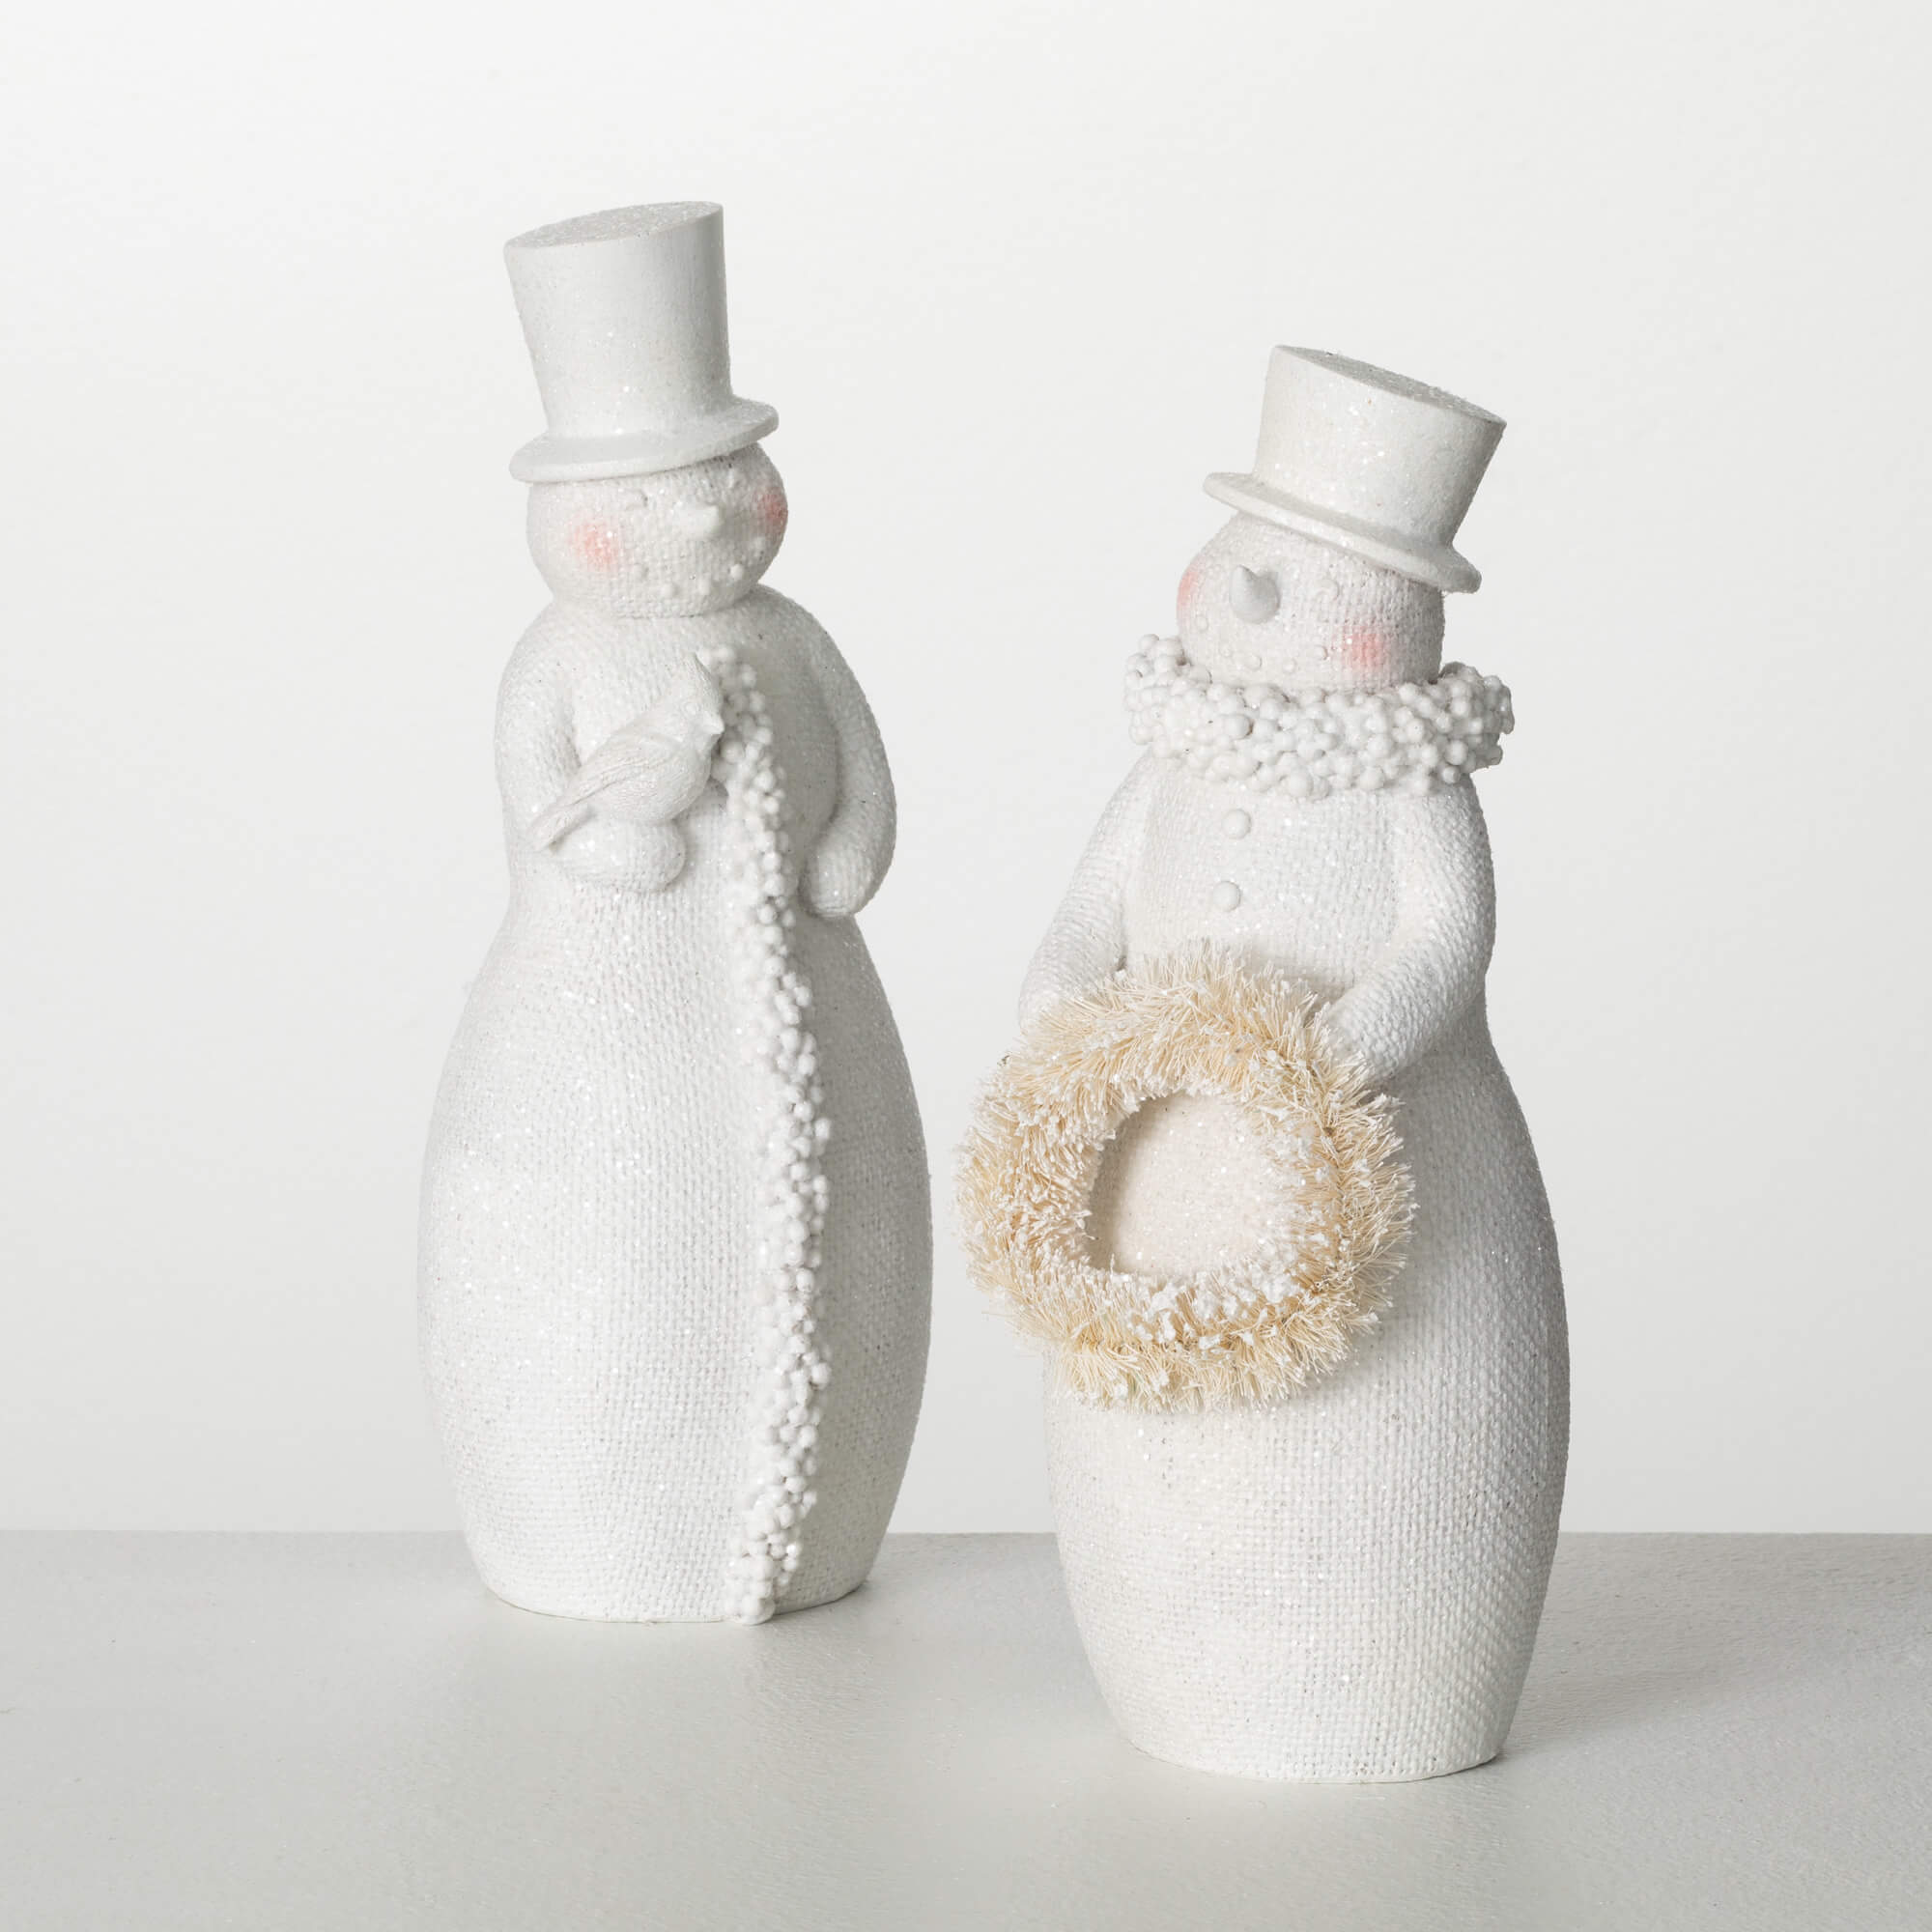 FROSTED SNOWMAN FIGURINES